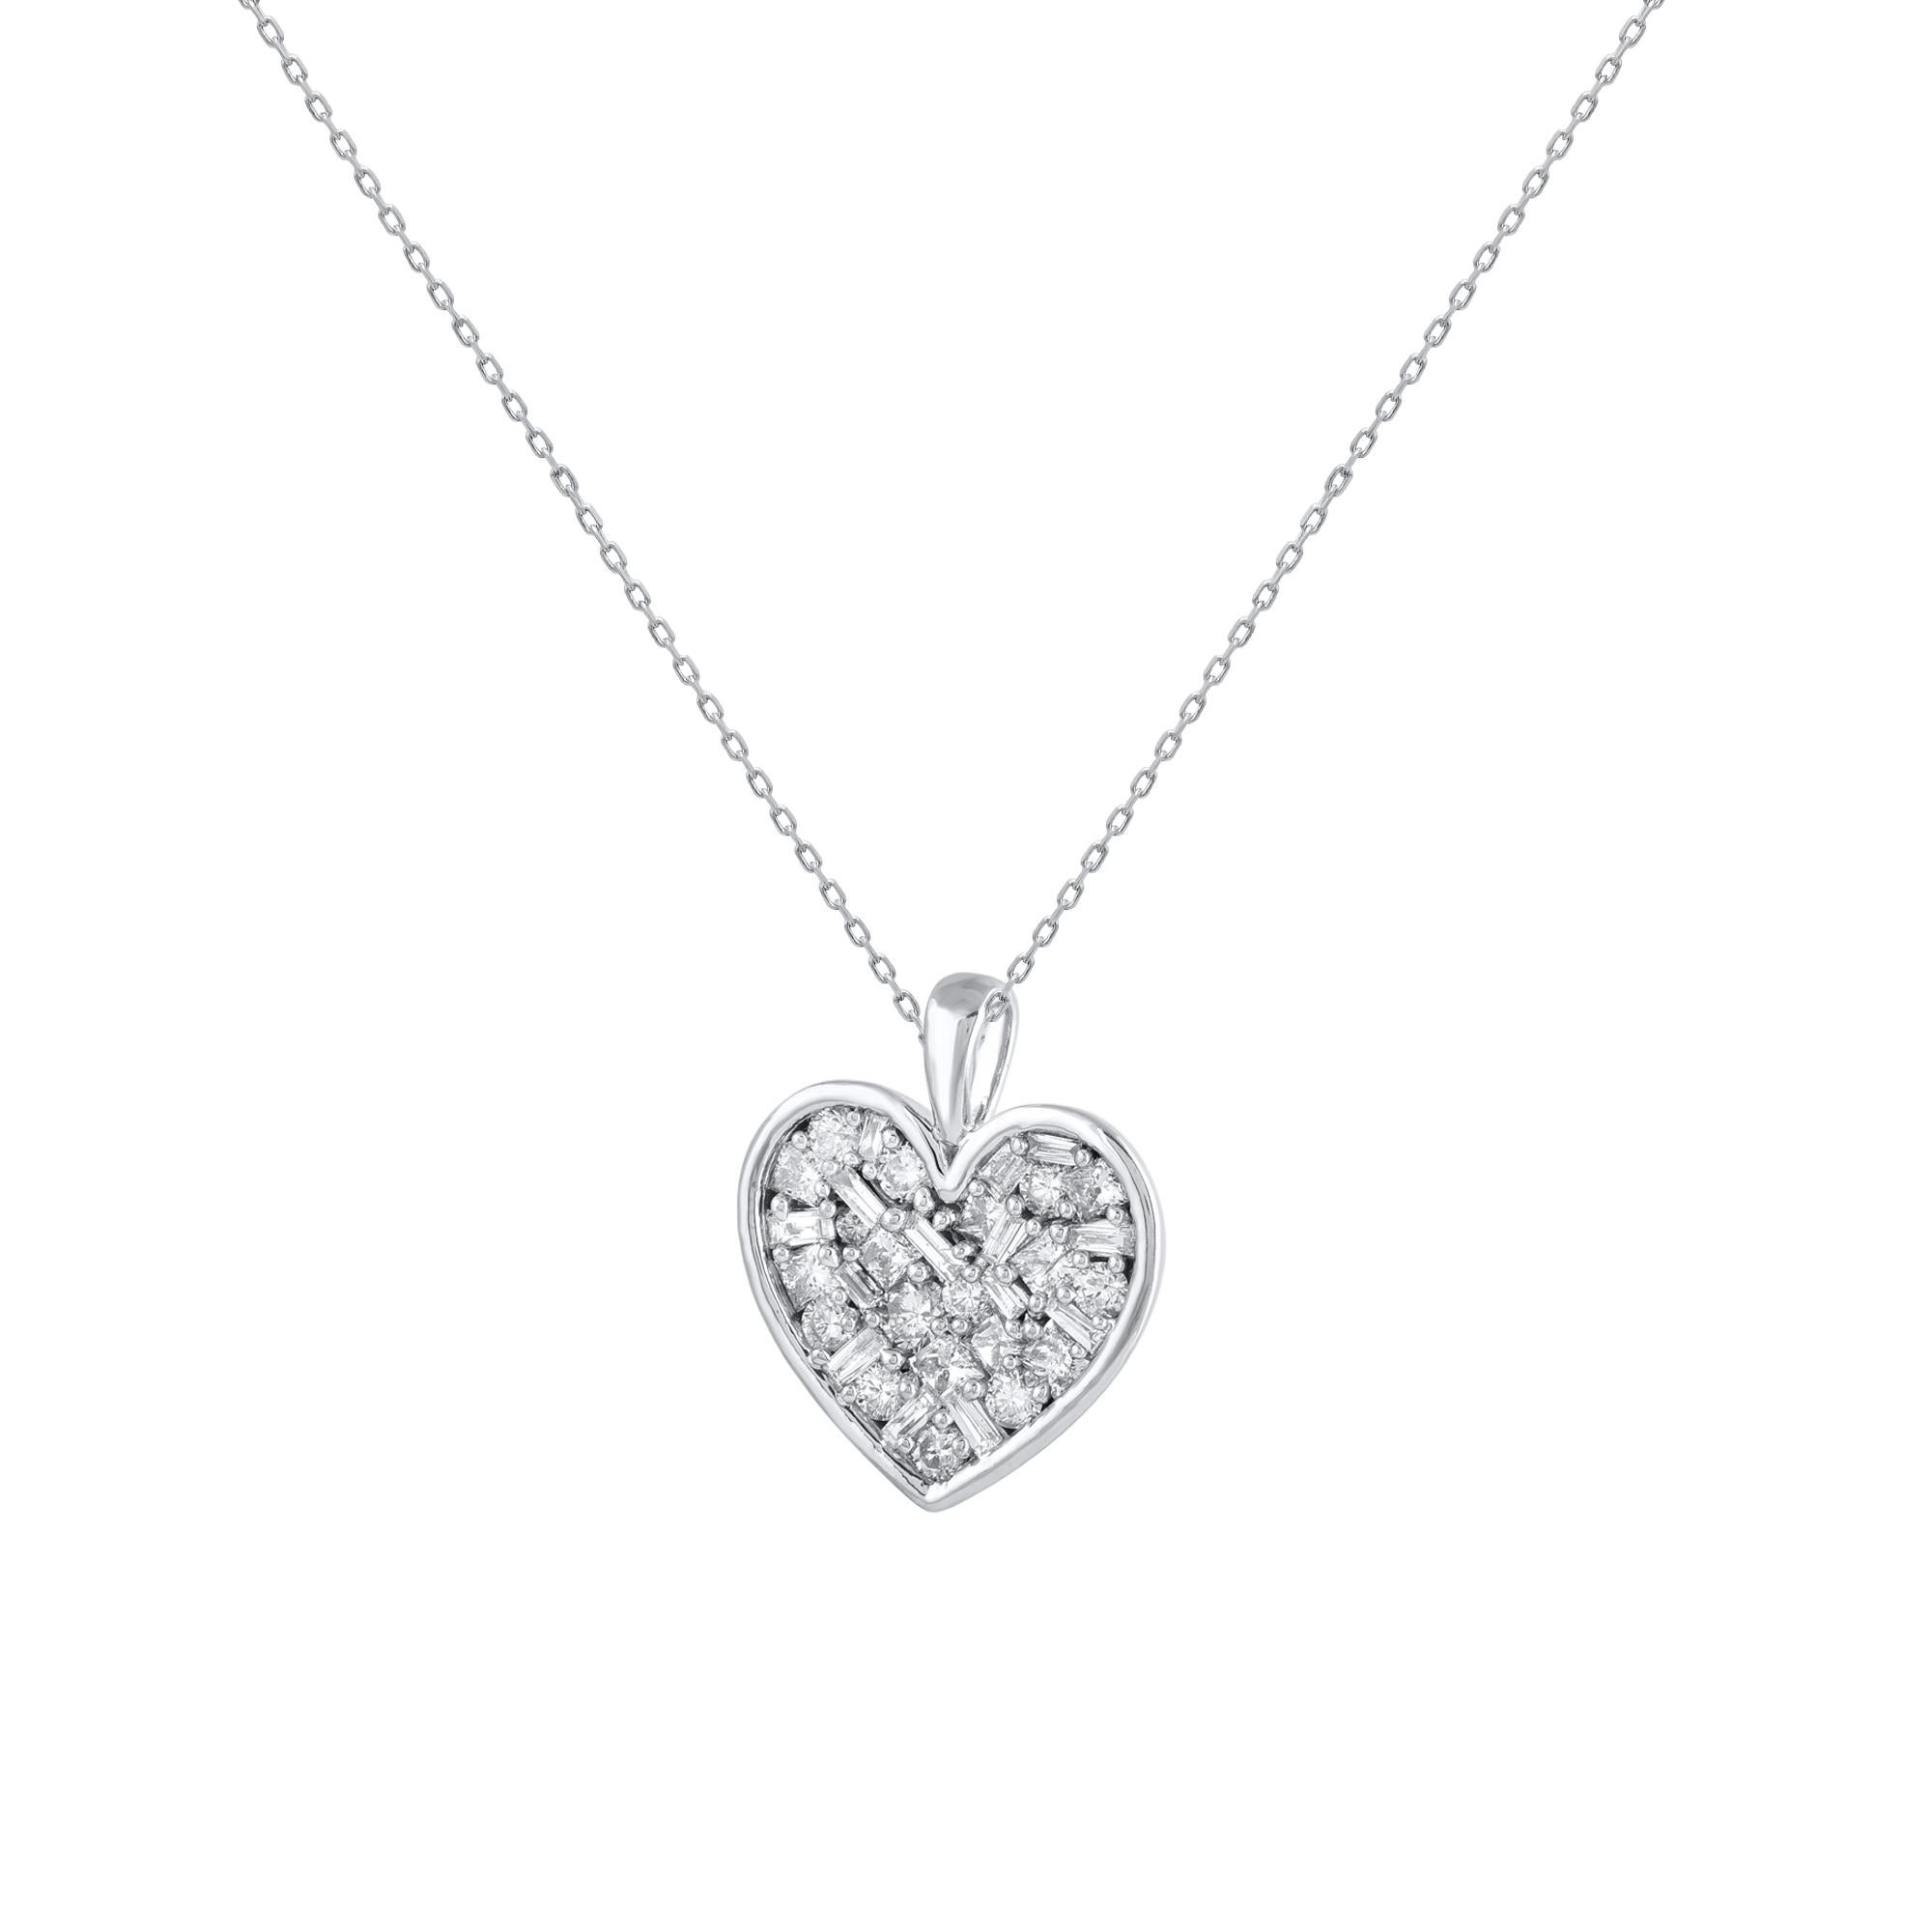 This classic diamond heart is a perfect anytime addition to her wardrobe. These heart pendant are studded with 34 princess cut, brilliant cut & baguette natural diamonds in prong setting. crafted in 18 karat white gold. Diamonds are graded as H-I